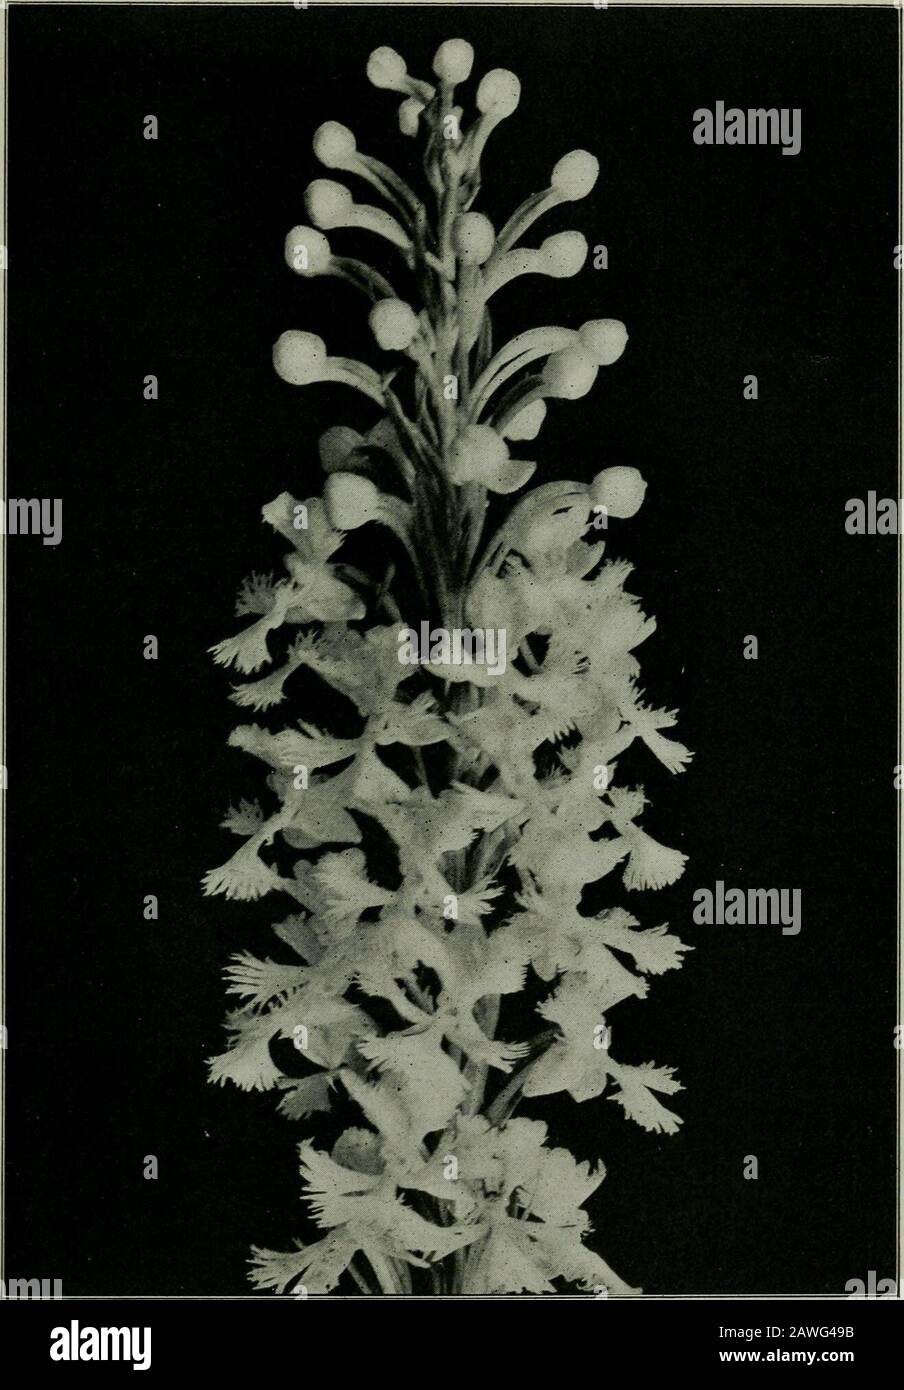 The flower and the bee; plant life and pollination . Fig. 74a. Night-Blooming Tobacco. Nicotiana noctifloraA hawk-moth flower. Fig. 75. White Variety of Purple-Fringed Orchis. Habenaria psychodes THE FLOWER AND THE BEE length of 11 inches. It seemed impossible at the time ofthe discovery of this plant that there should be in existencea moth with a tongue long enough to consume all of thenectar, but such a moth was later actually found. To re-move the pollen masses it must thrust its long proboscisinto the nectary up to its very base. If these great mothswere to become extinct, then assuredly A Stock Photo